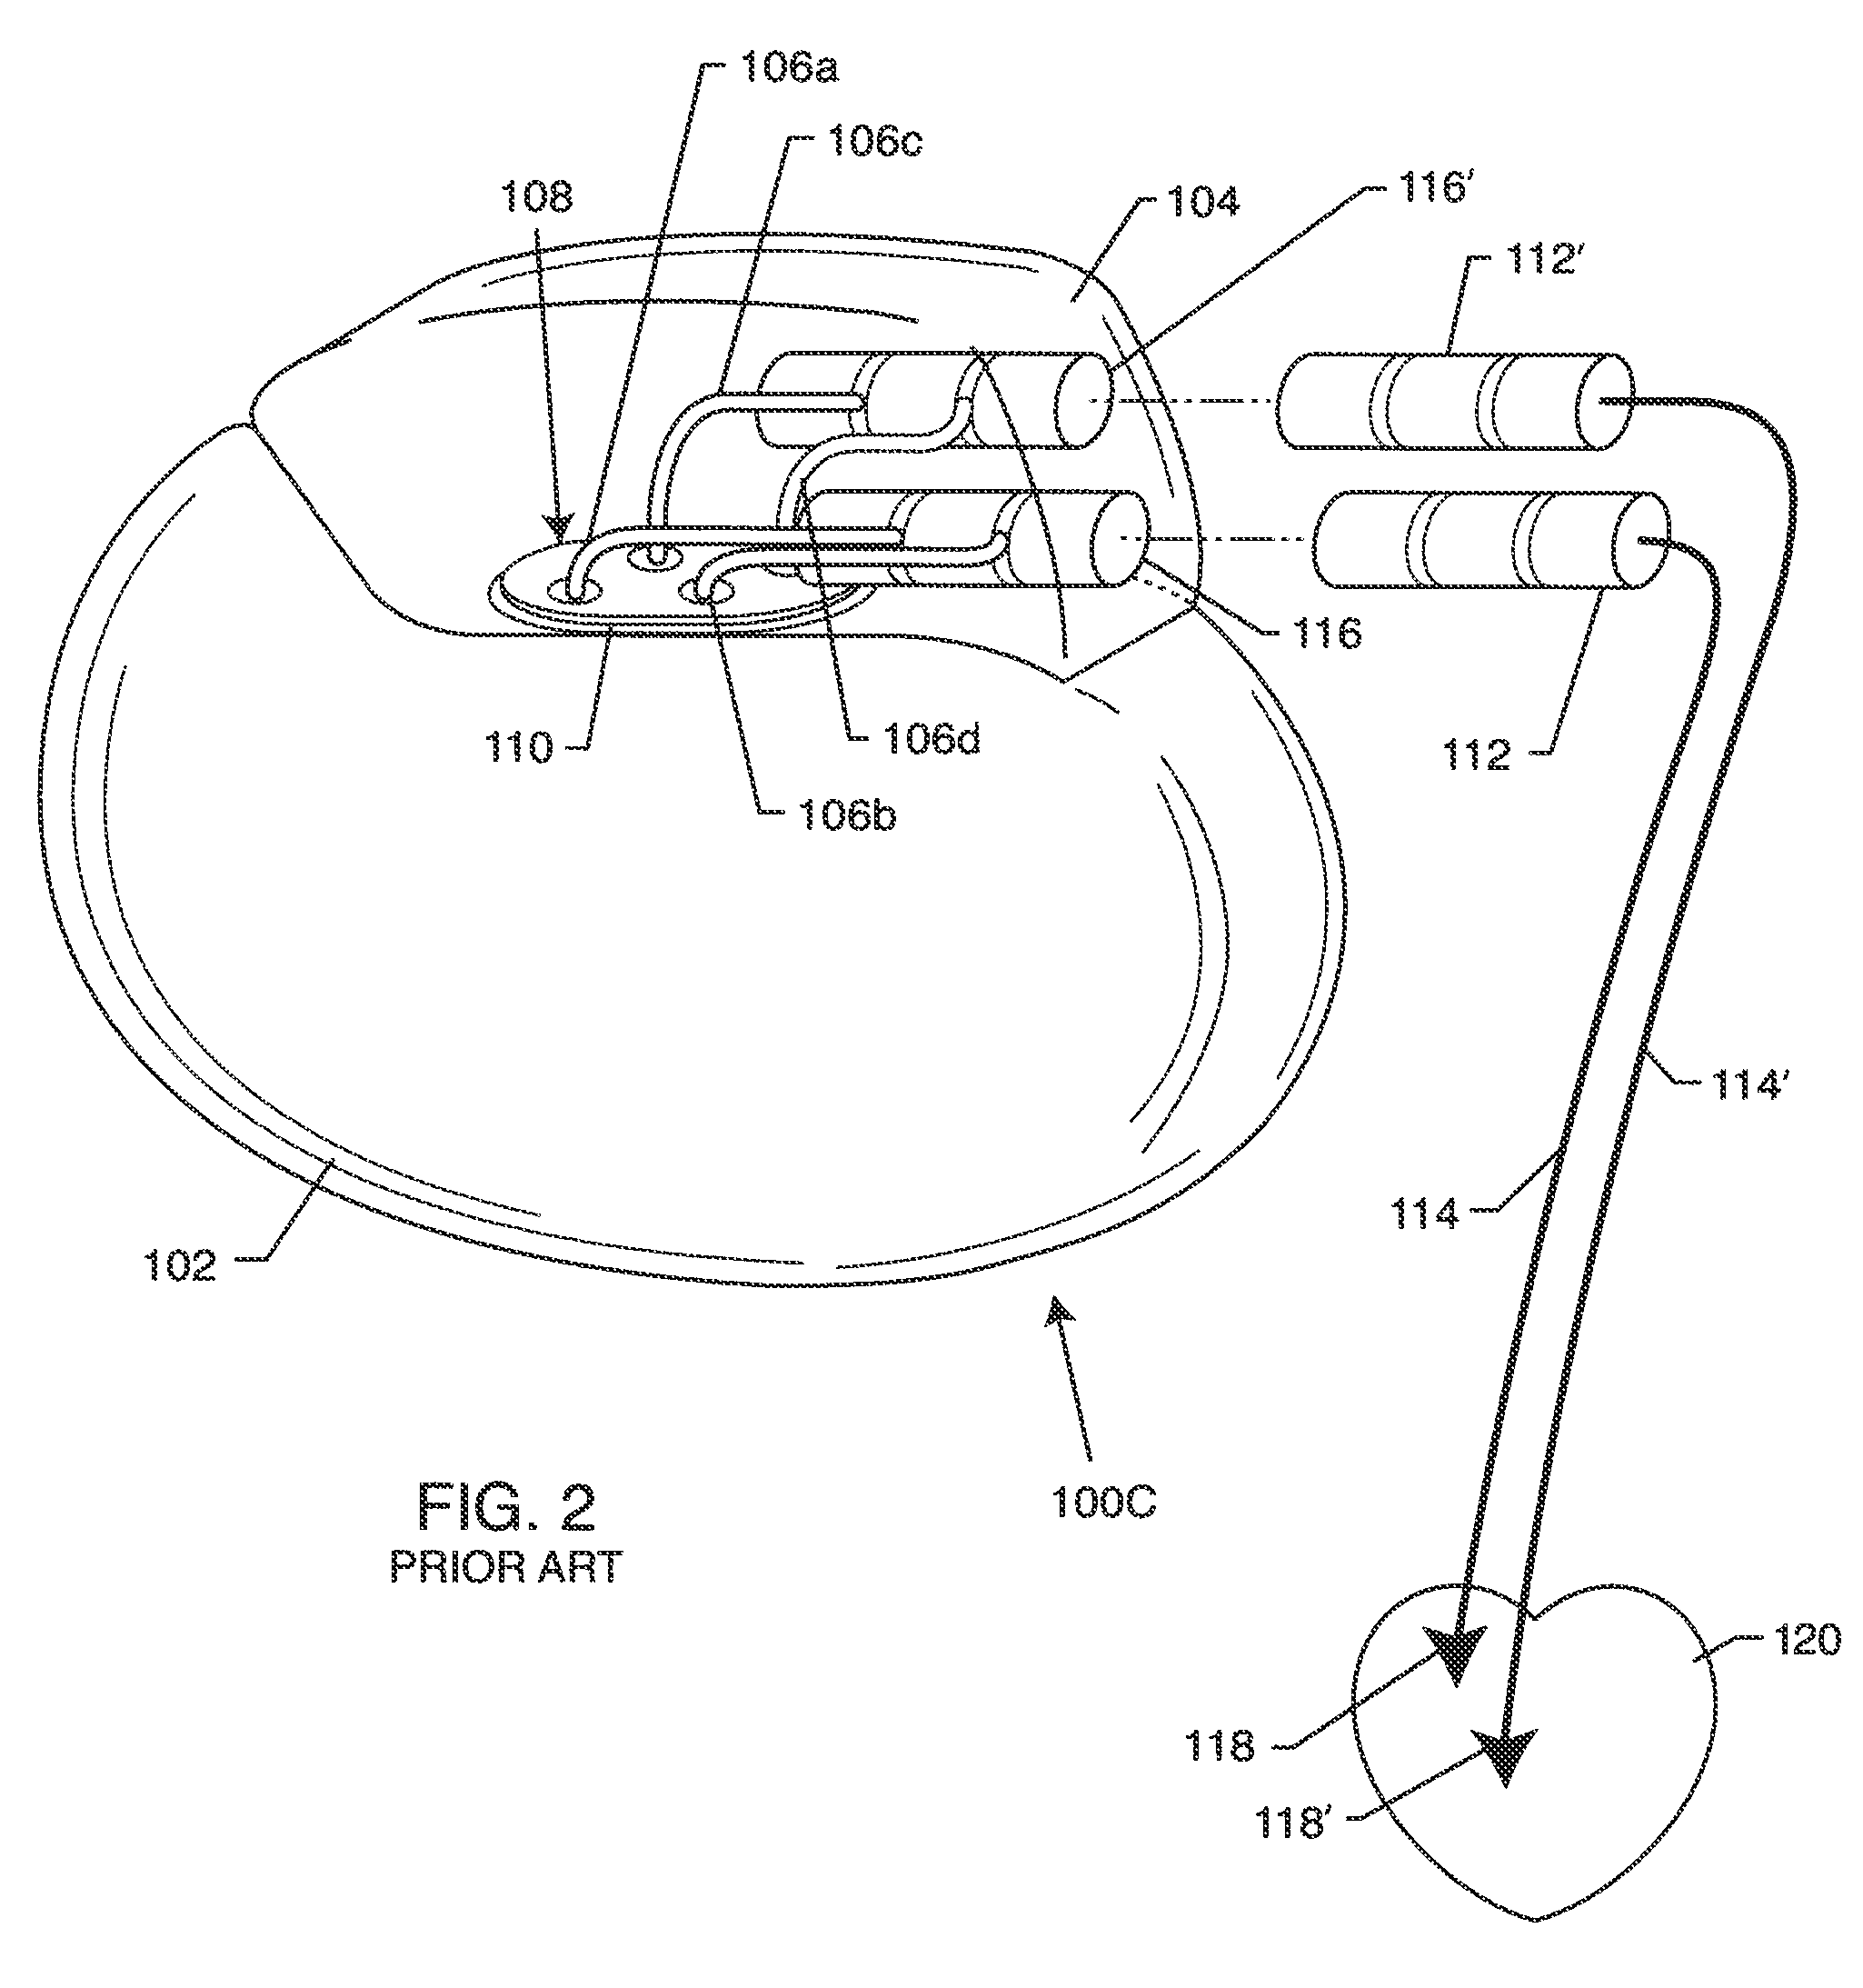 Electromagnetic shield for a passive electronic component in an active medical device implantable lead